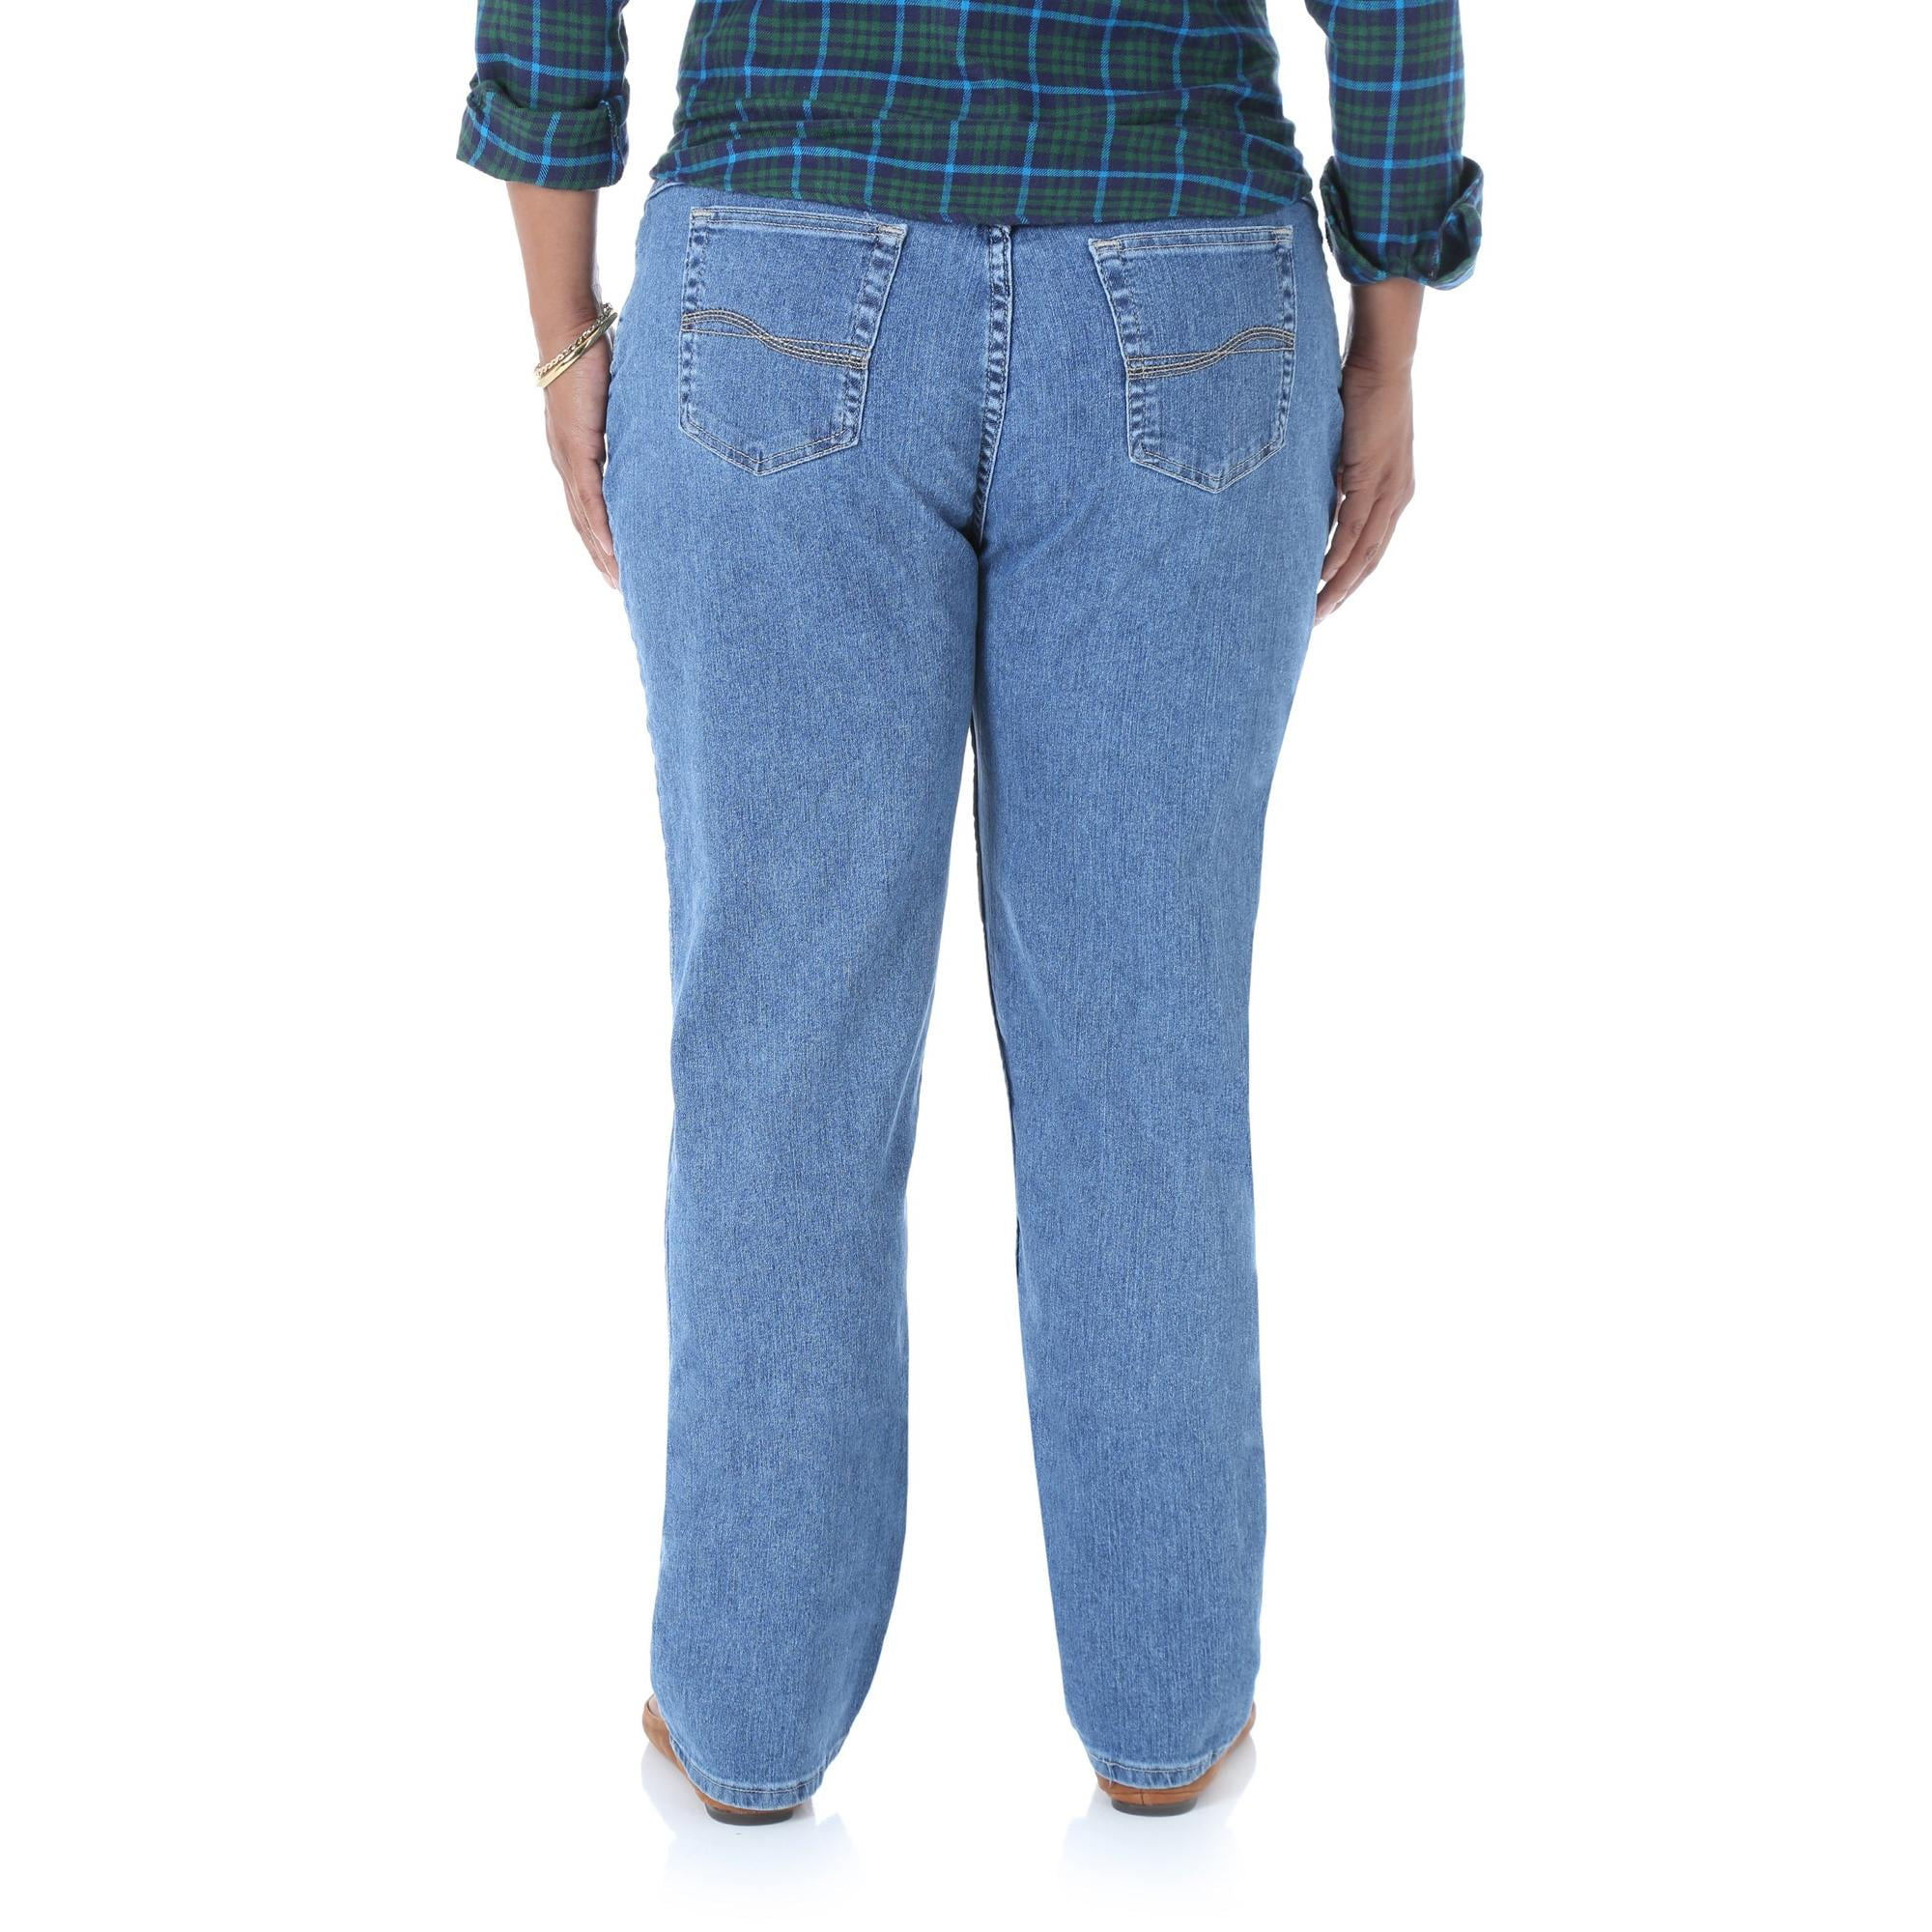 riders plus size jeans